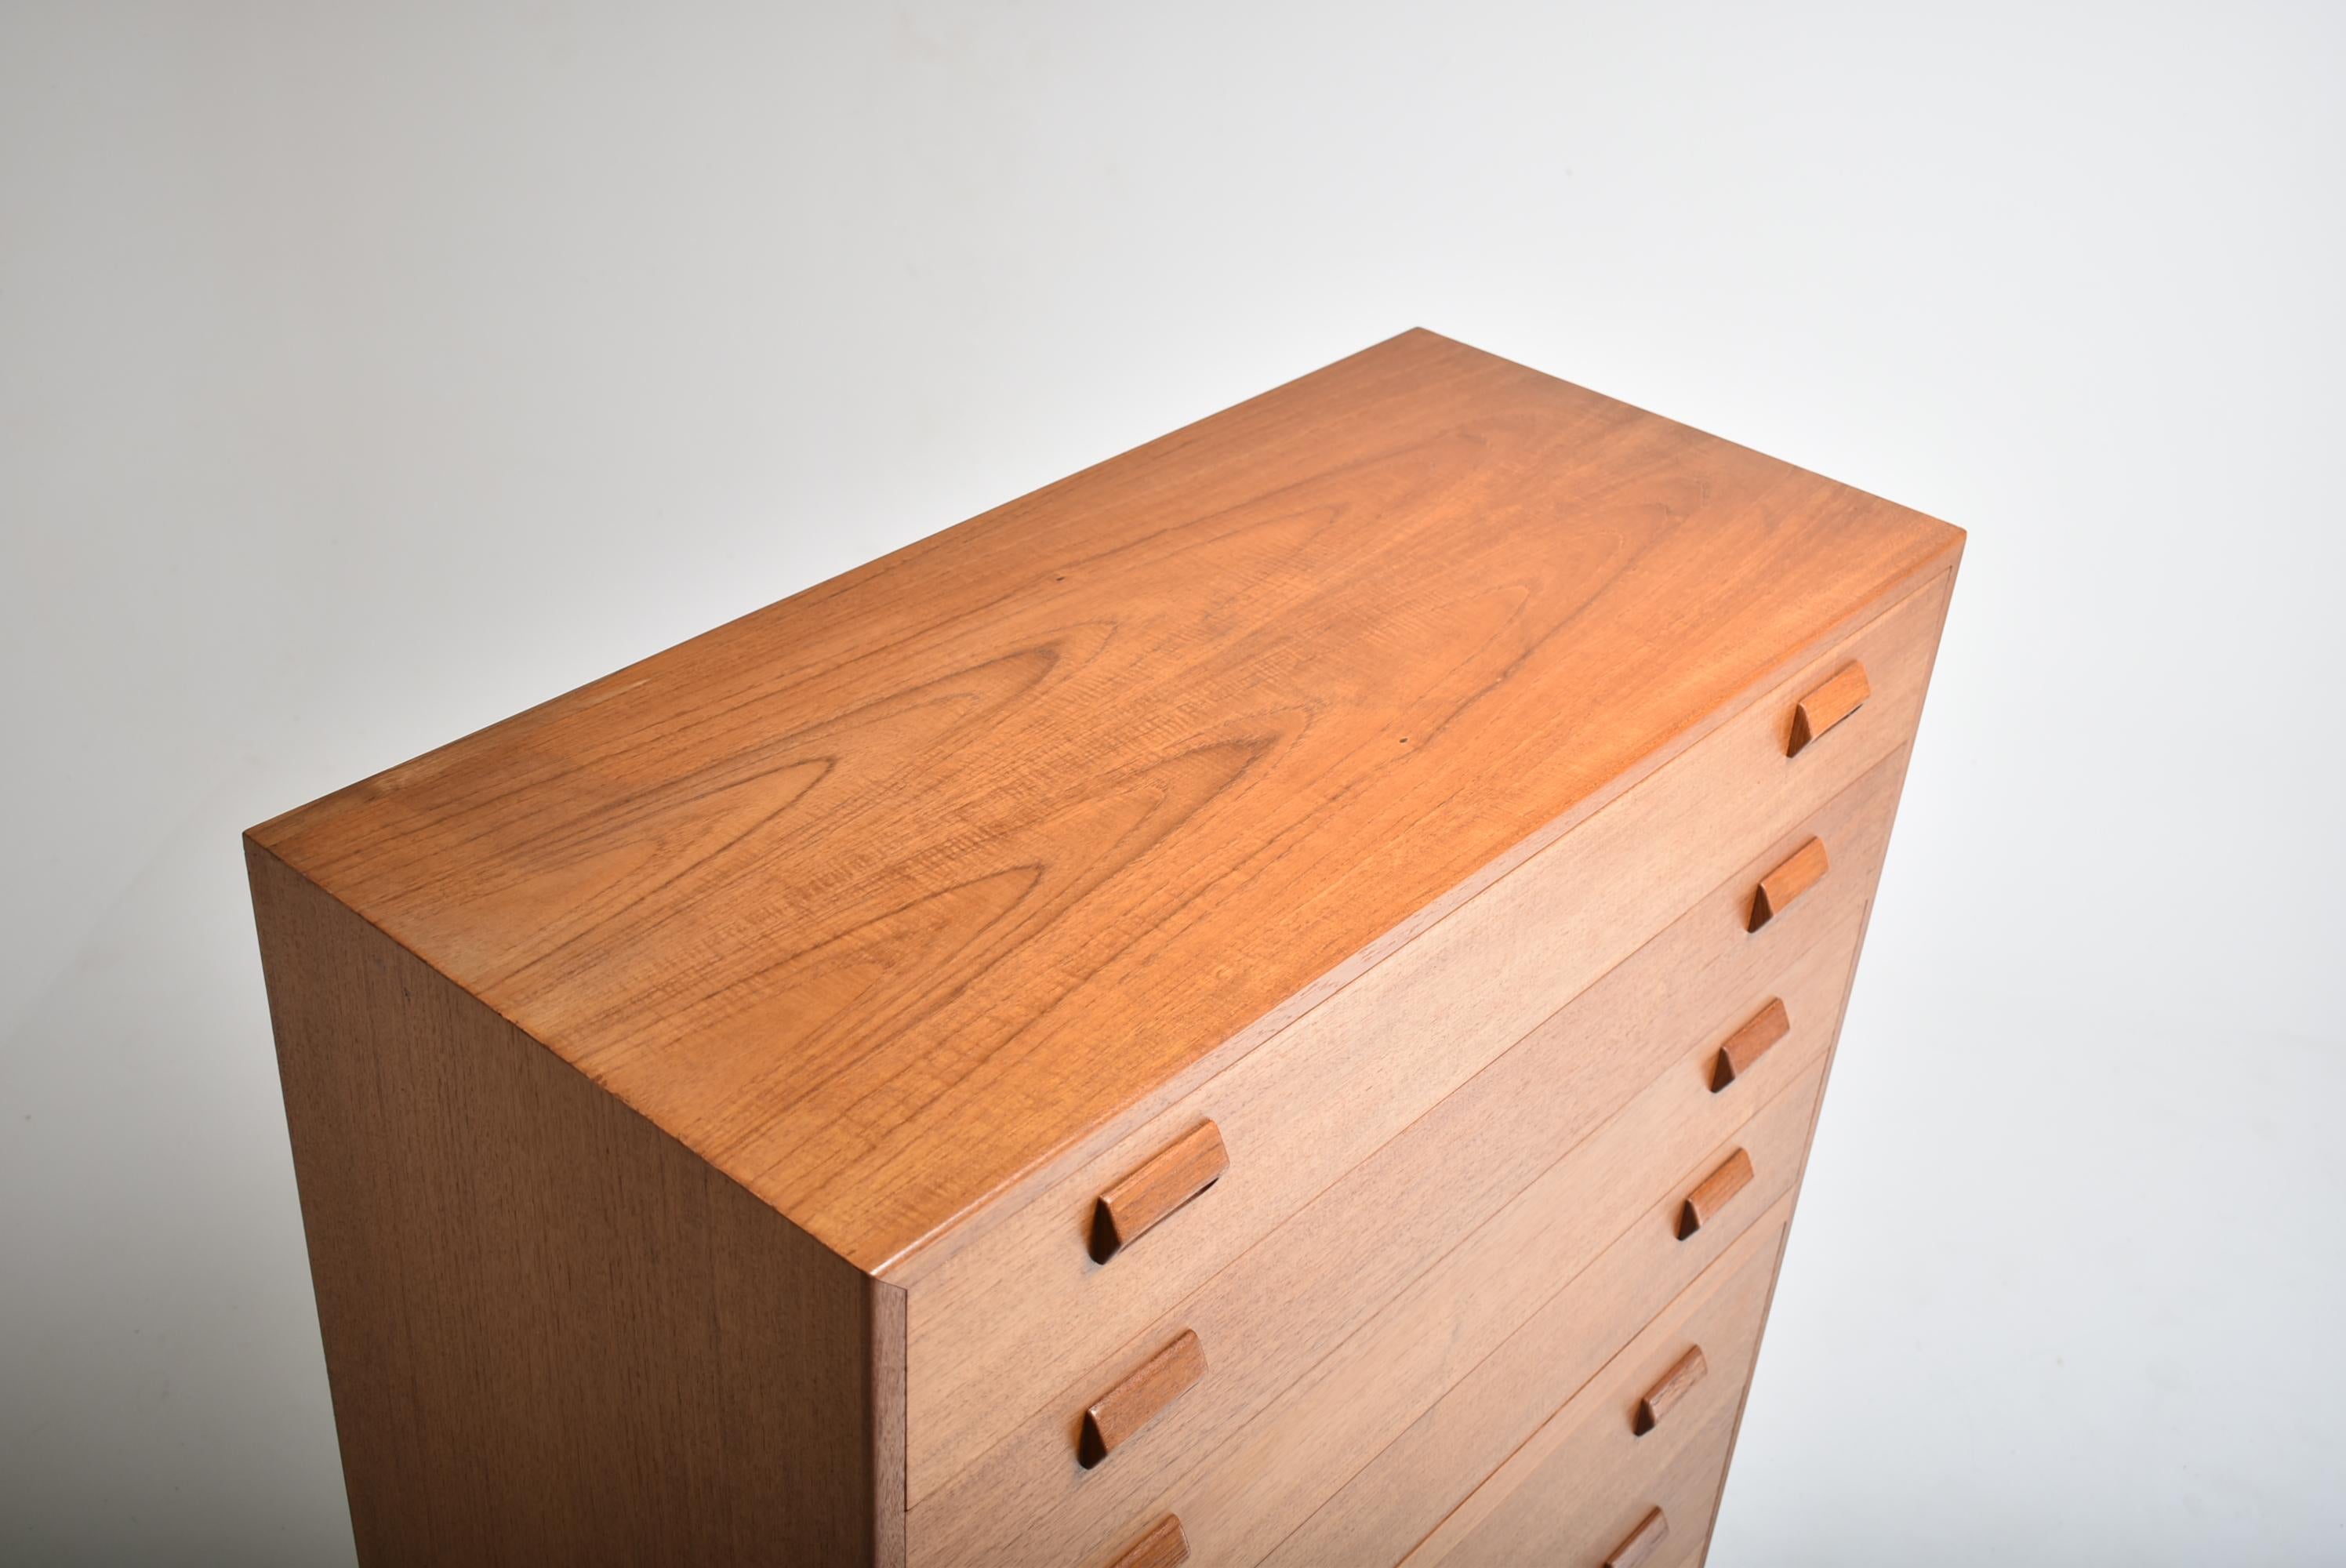 Teak Chest Of Drawers By Borge Mogensen, Denmark, 1960 In Good Condition For Sale In Le Grand-Saconnex, CH